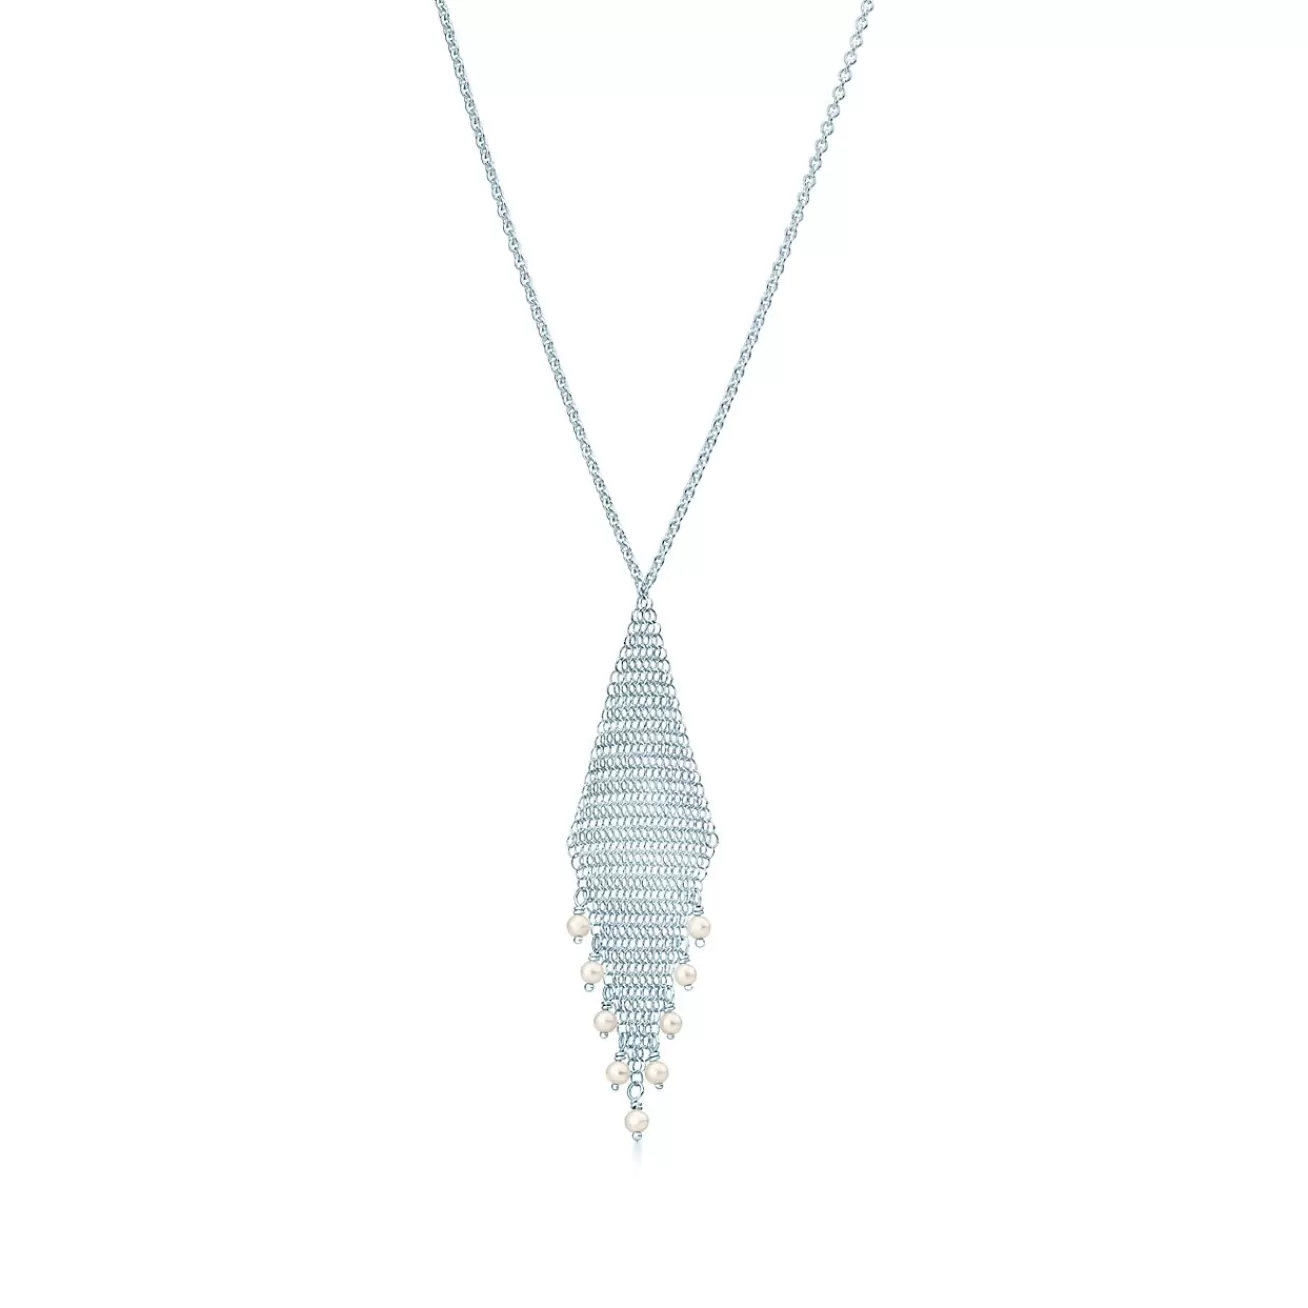 Tiffany & Co. Elsa Peretti® Mesh fringe pendant in sterling silver with freshwater pearls. | ^ Necklaces & Pendants | Sterling Silver Jewelry